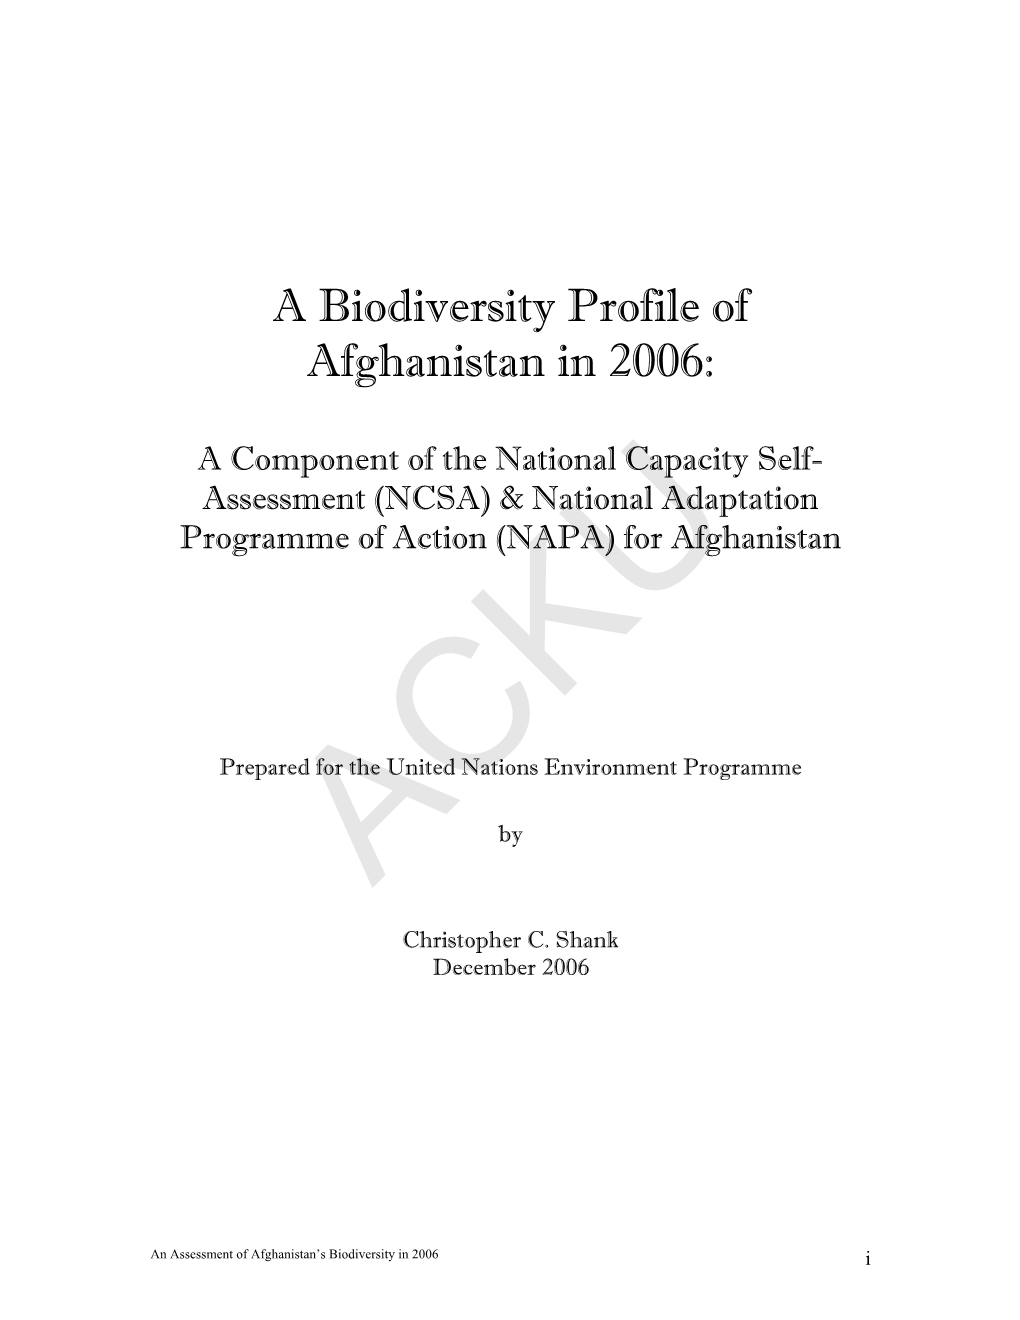 A Biodiversity Profile of Afghanistan in 2006